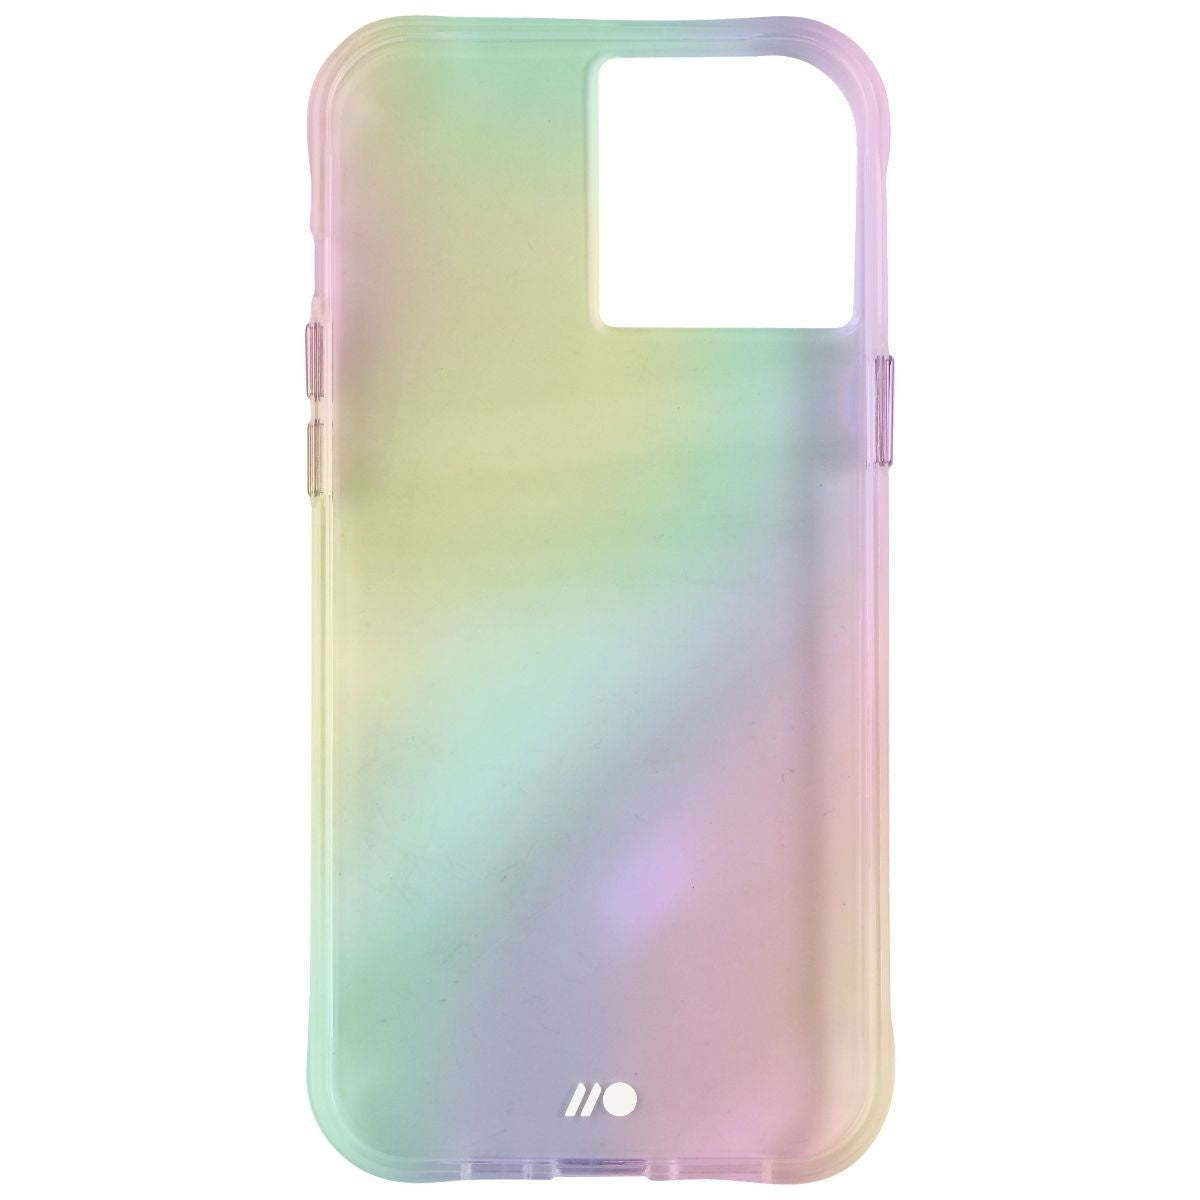 DO NOT USE - Please Check P79579 Family Cell Phone - Cases, Covers & Skins Case-Mate    - Simple Cell Bulk Wholesale Pricing - USA Seller